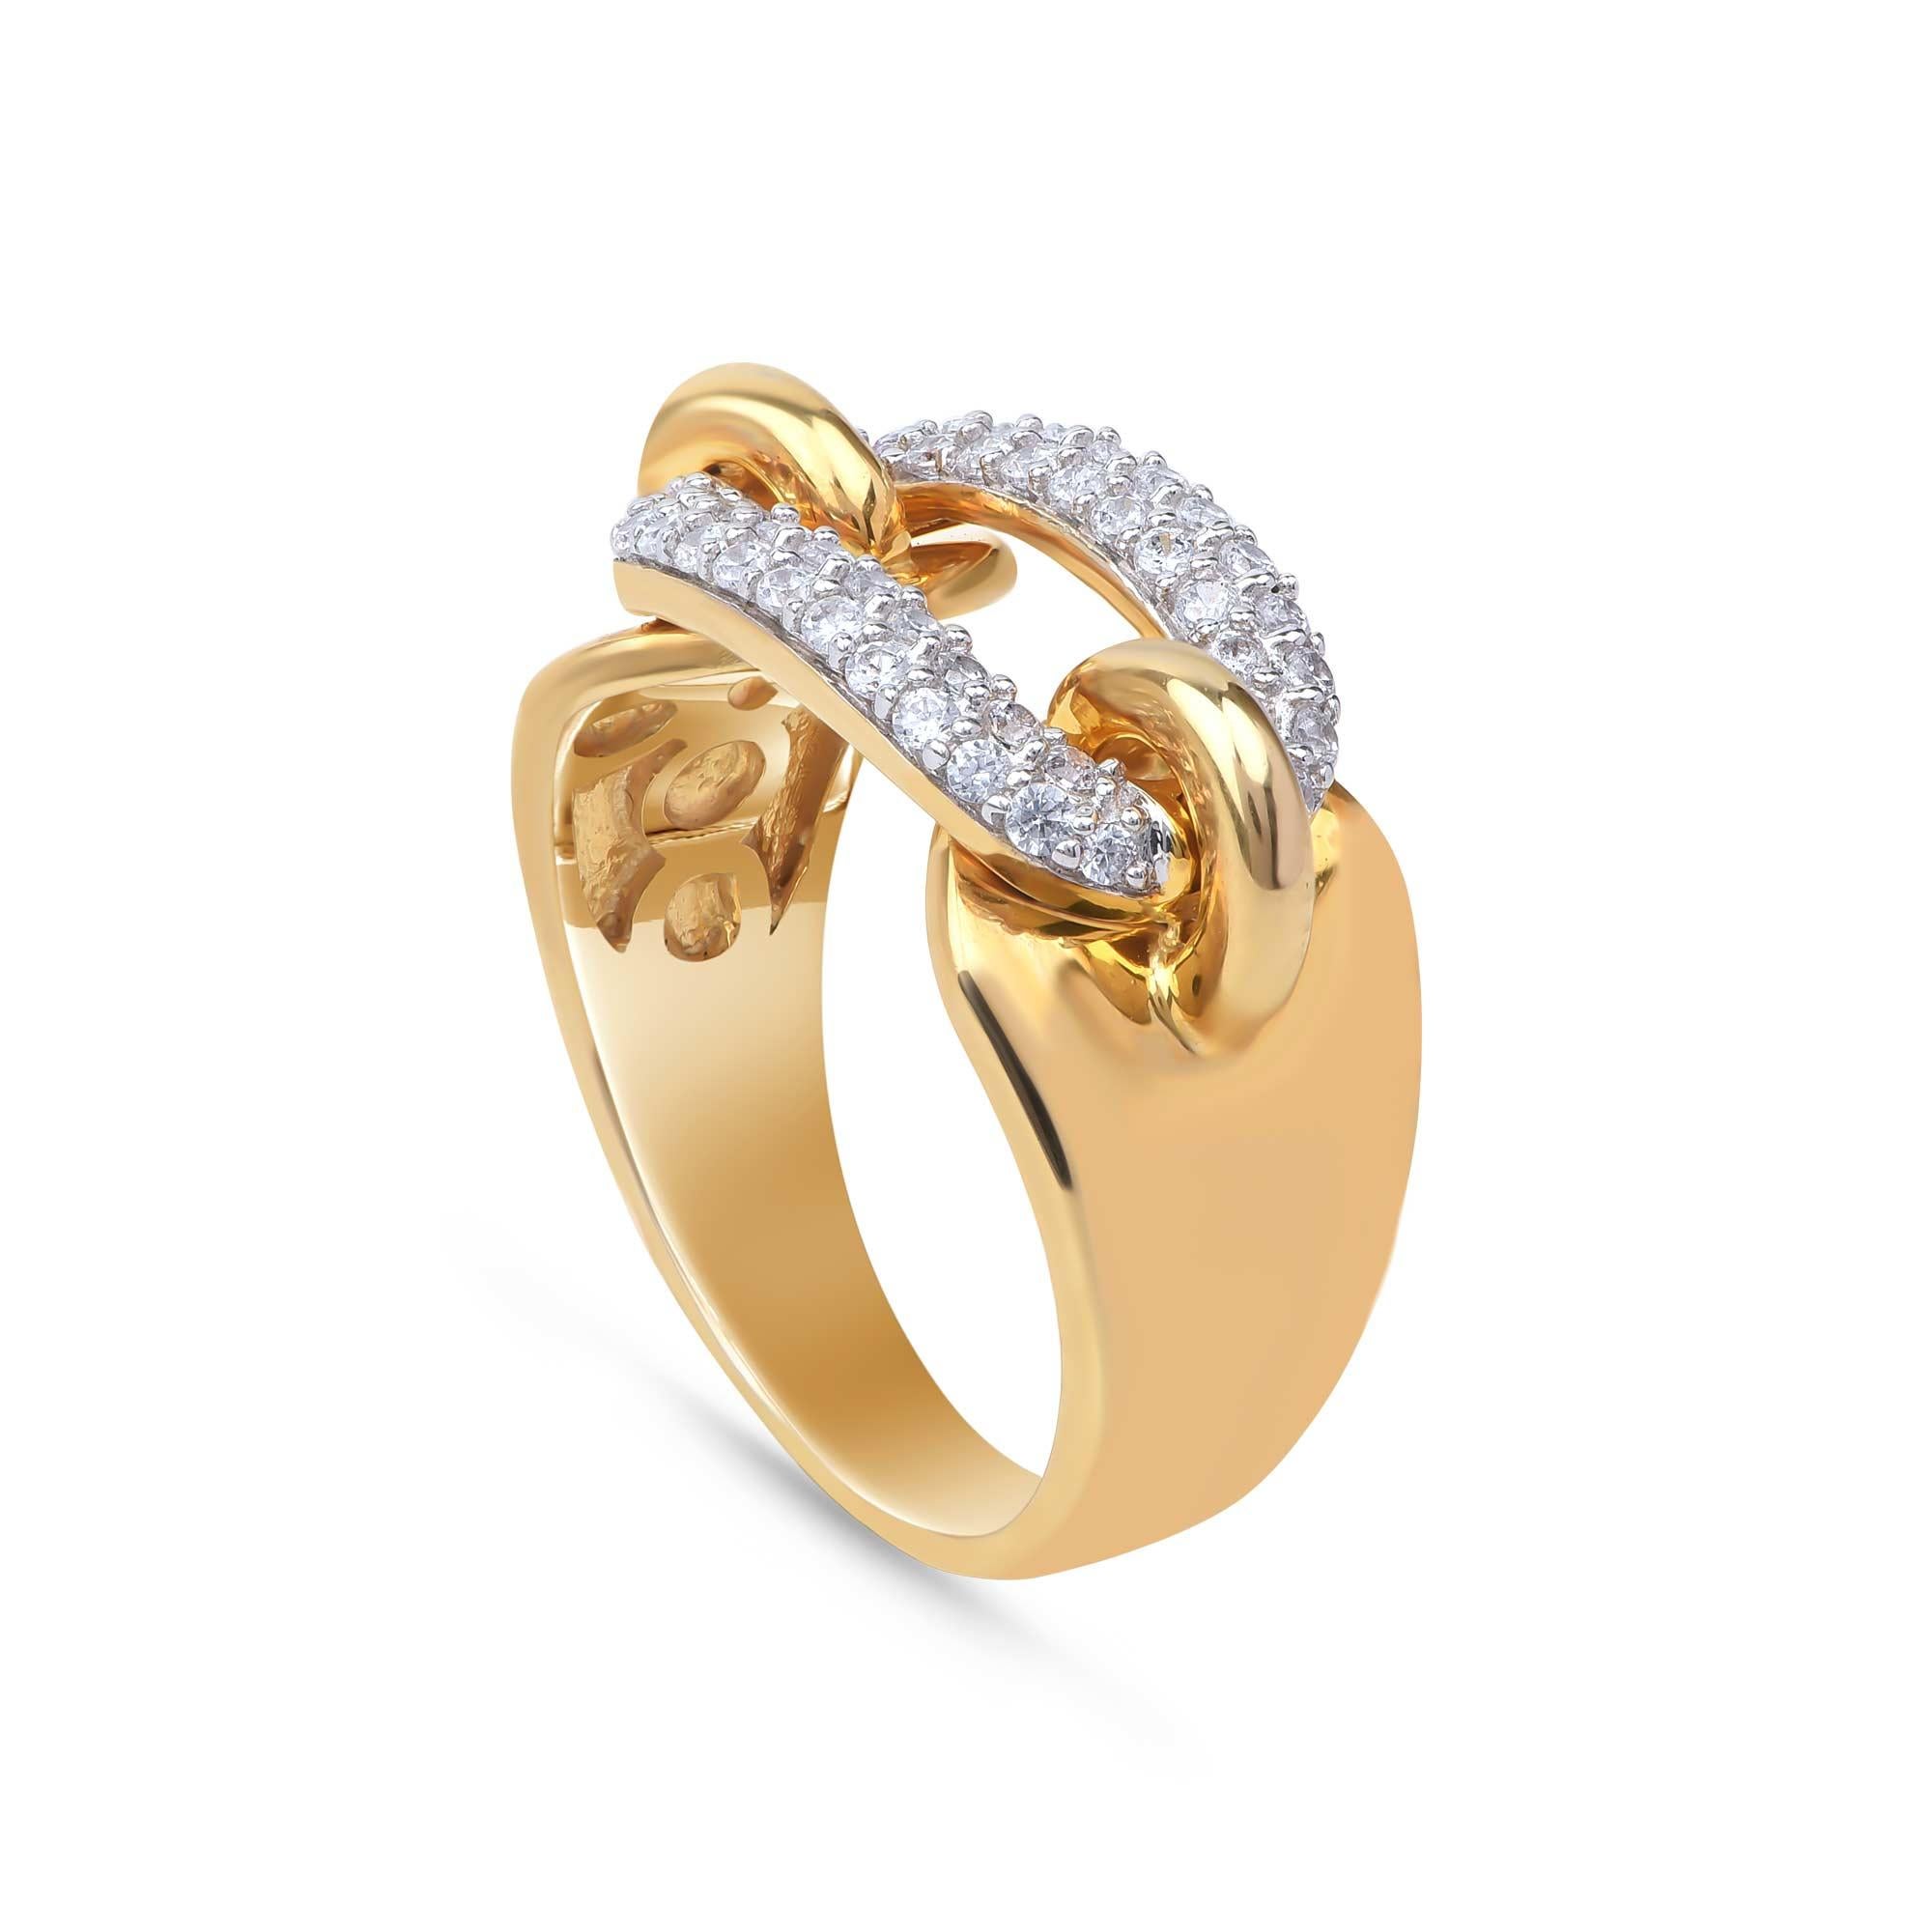 The ring dazzles with 46 brilliant natural diamonds in micro-prong setting and expertly designed in 18 kt yellow gold. Diamonds are graded H-I Color, I2 Clarity.  

Metal color and ring size can be customized on request. 

This piece is made to